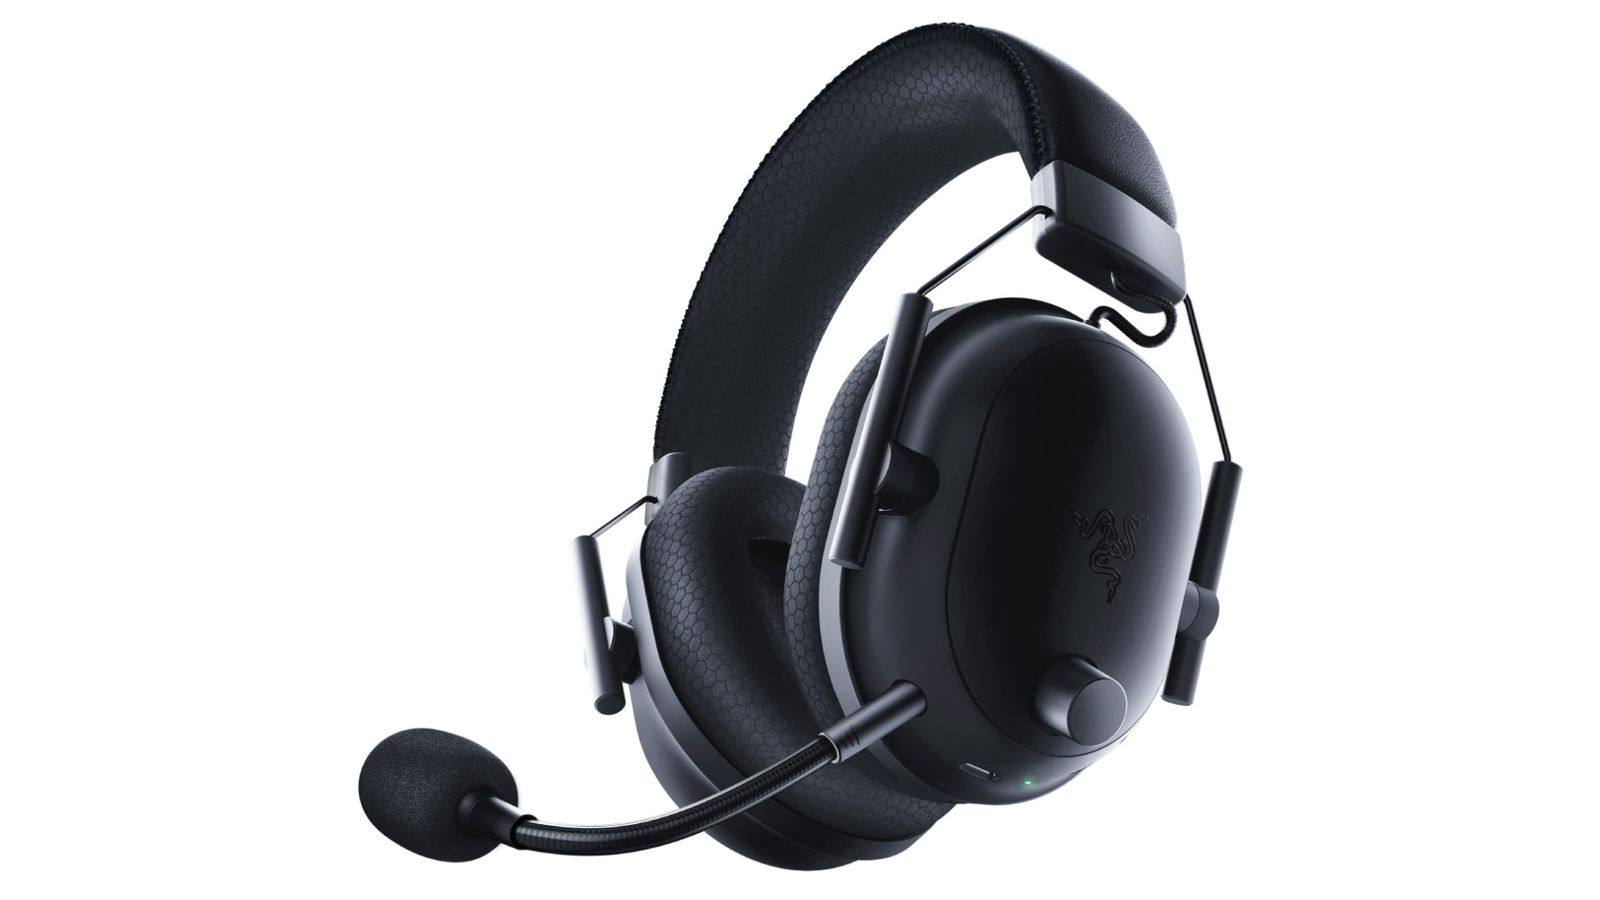 Best headset for Gran Turismo 7 - Razer Blackshark V2 Pro product image of an all-black over-ear headset featuring a mic that extends around the front.